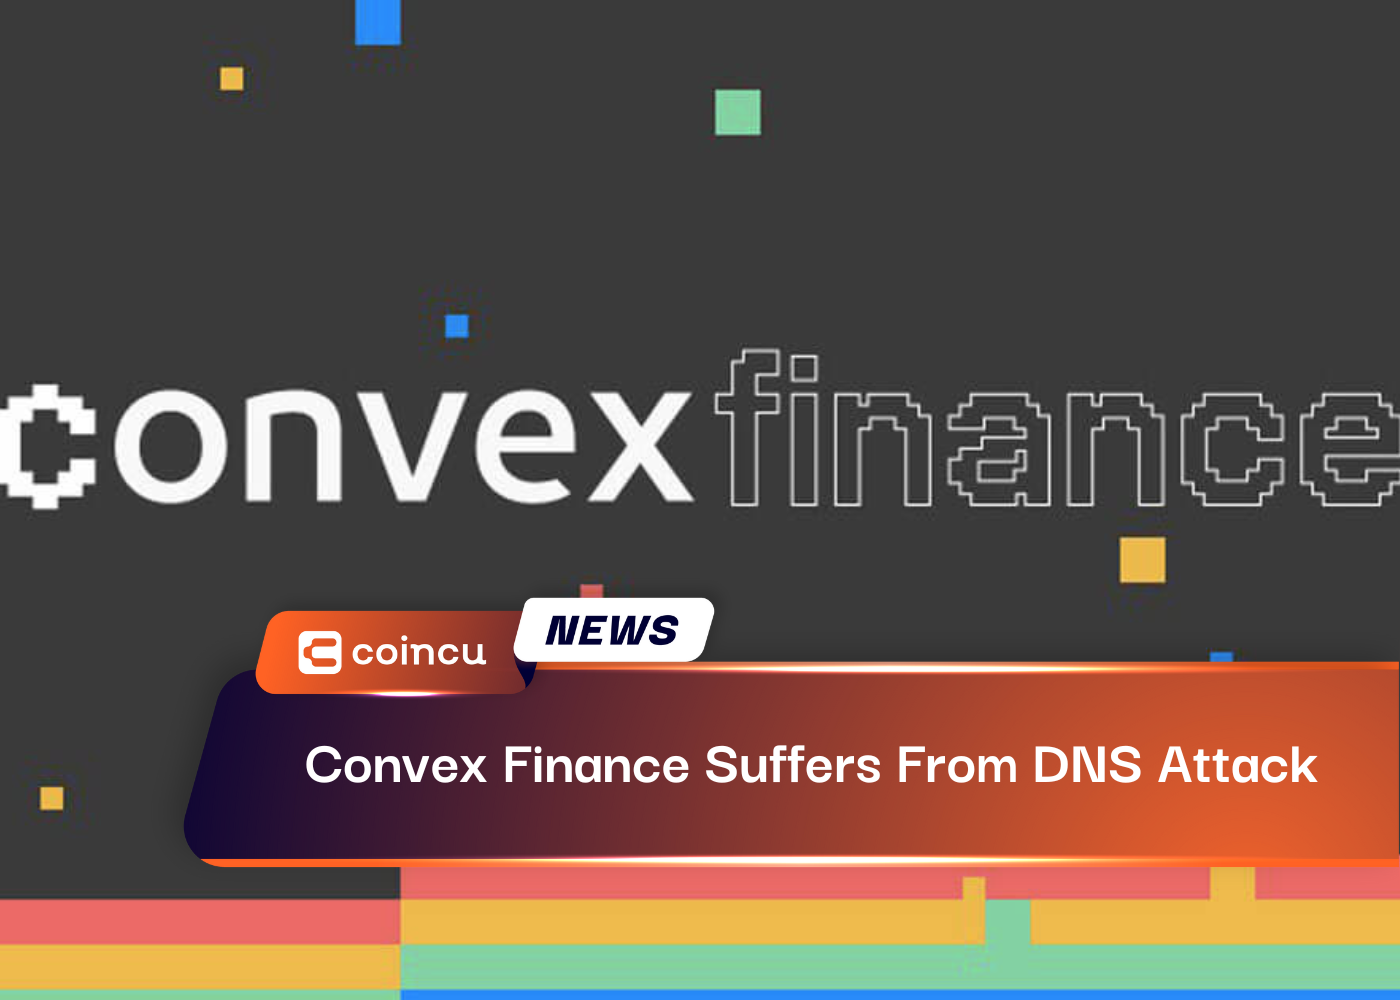 Convex Finance Suffers From DNS Attack